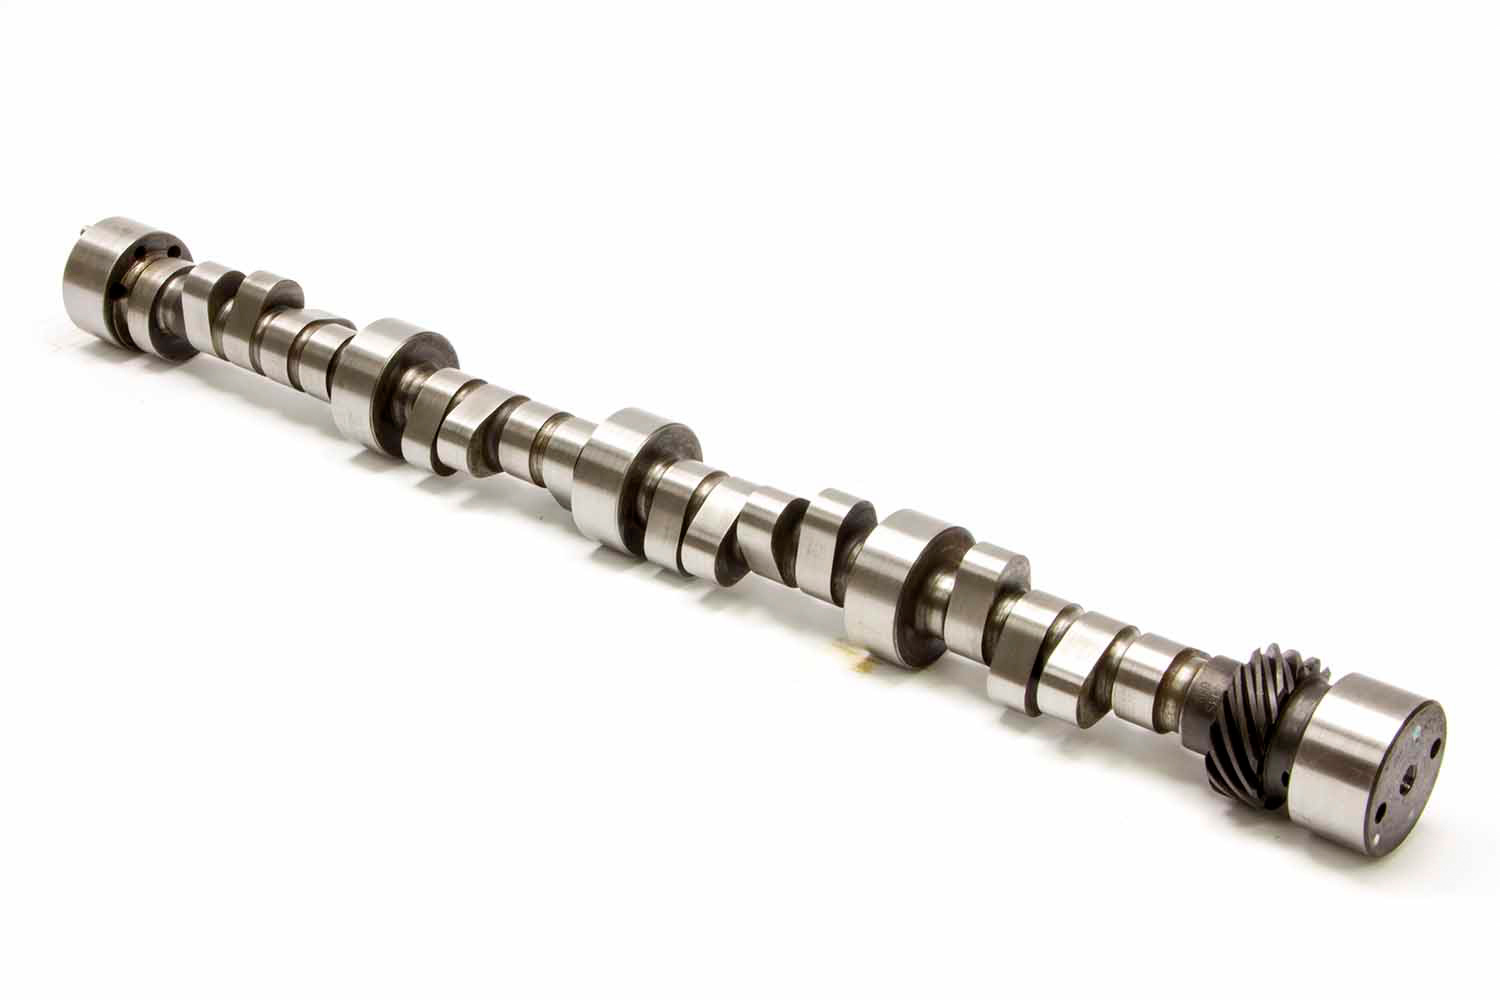 Lunati Cams 40120731 Camshaft, Voodoo, Mechanical Roller, Lift 0.566 / 0.578 in, Duration 267 / 273, 110 LSA, 2500 / 6800 RPM, Small Block Chevy, Each